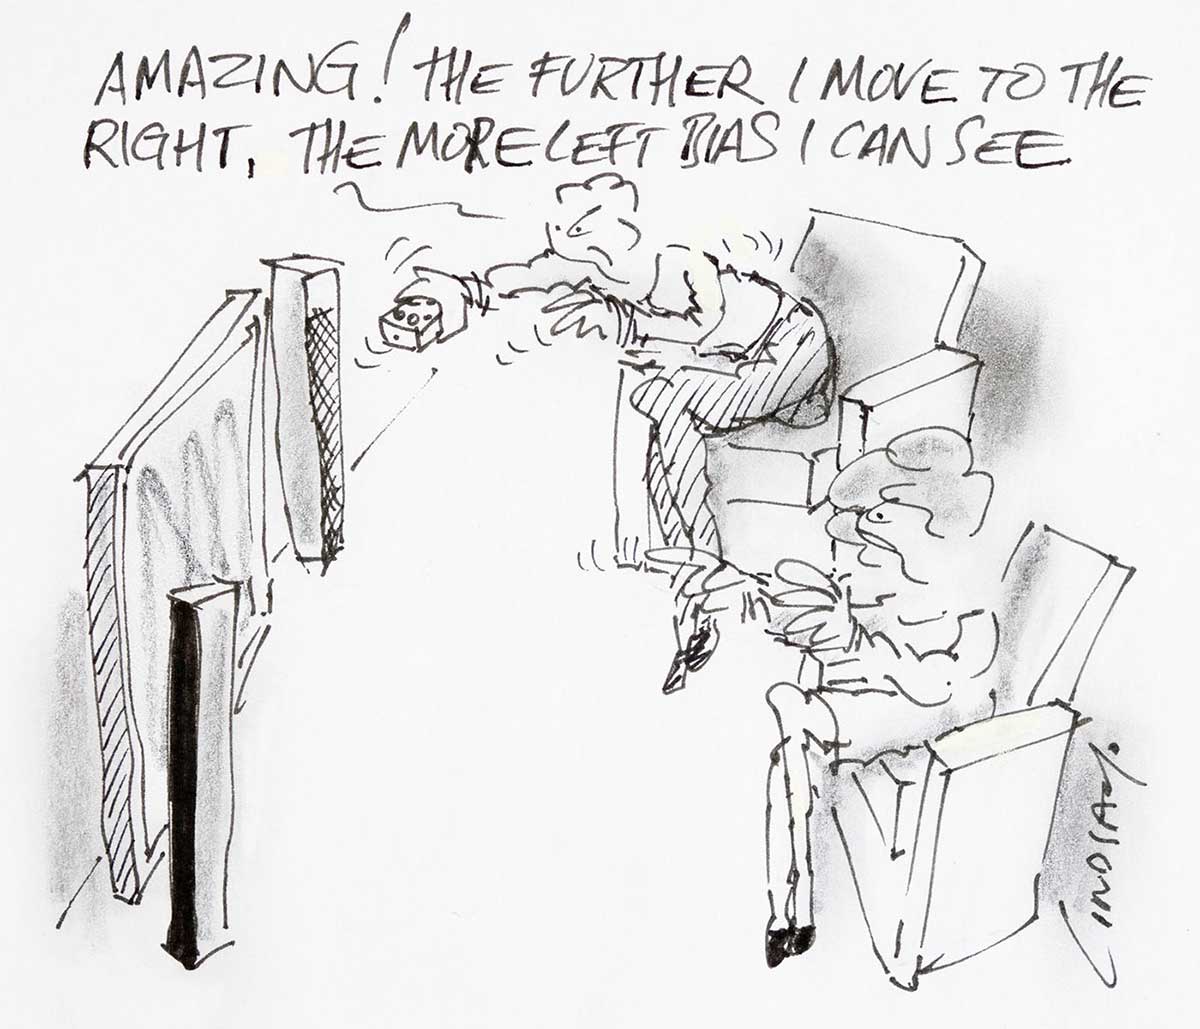 Cartoon of two people watching ABC TV and one person commenting, "Amazing!, the further I move to the right, the more left bias I can see" - click to view larger image